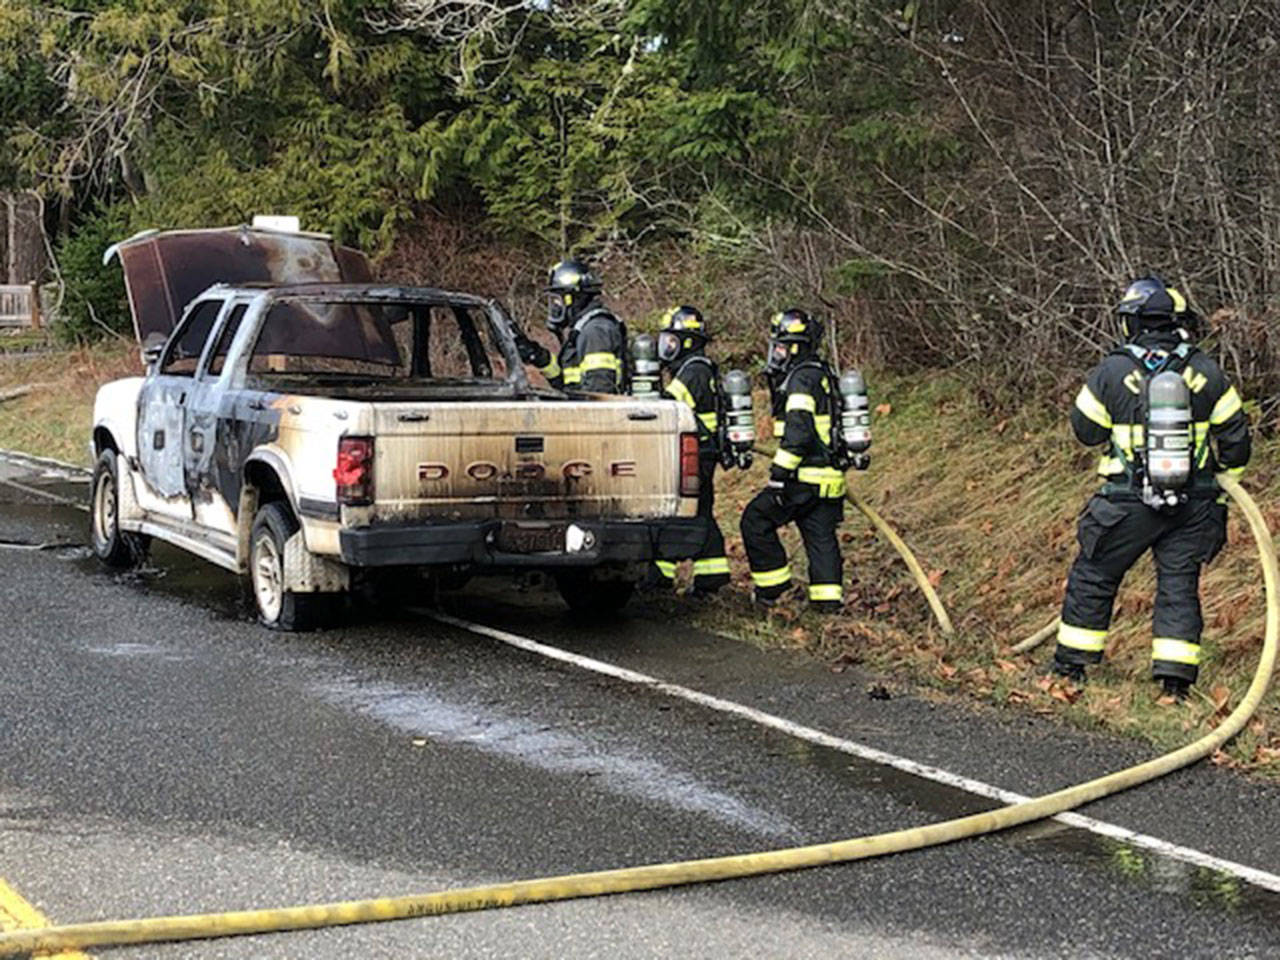 Clallam County Fire District No. 2 crews extinguish a vehicle fire near Dry Creek Elementary School west of Port Angeles on Monday. (Chief Jake Patterson/Clallam 2 Fire Rescue)